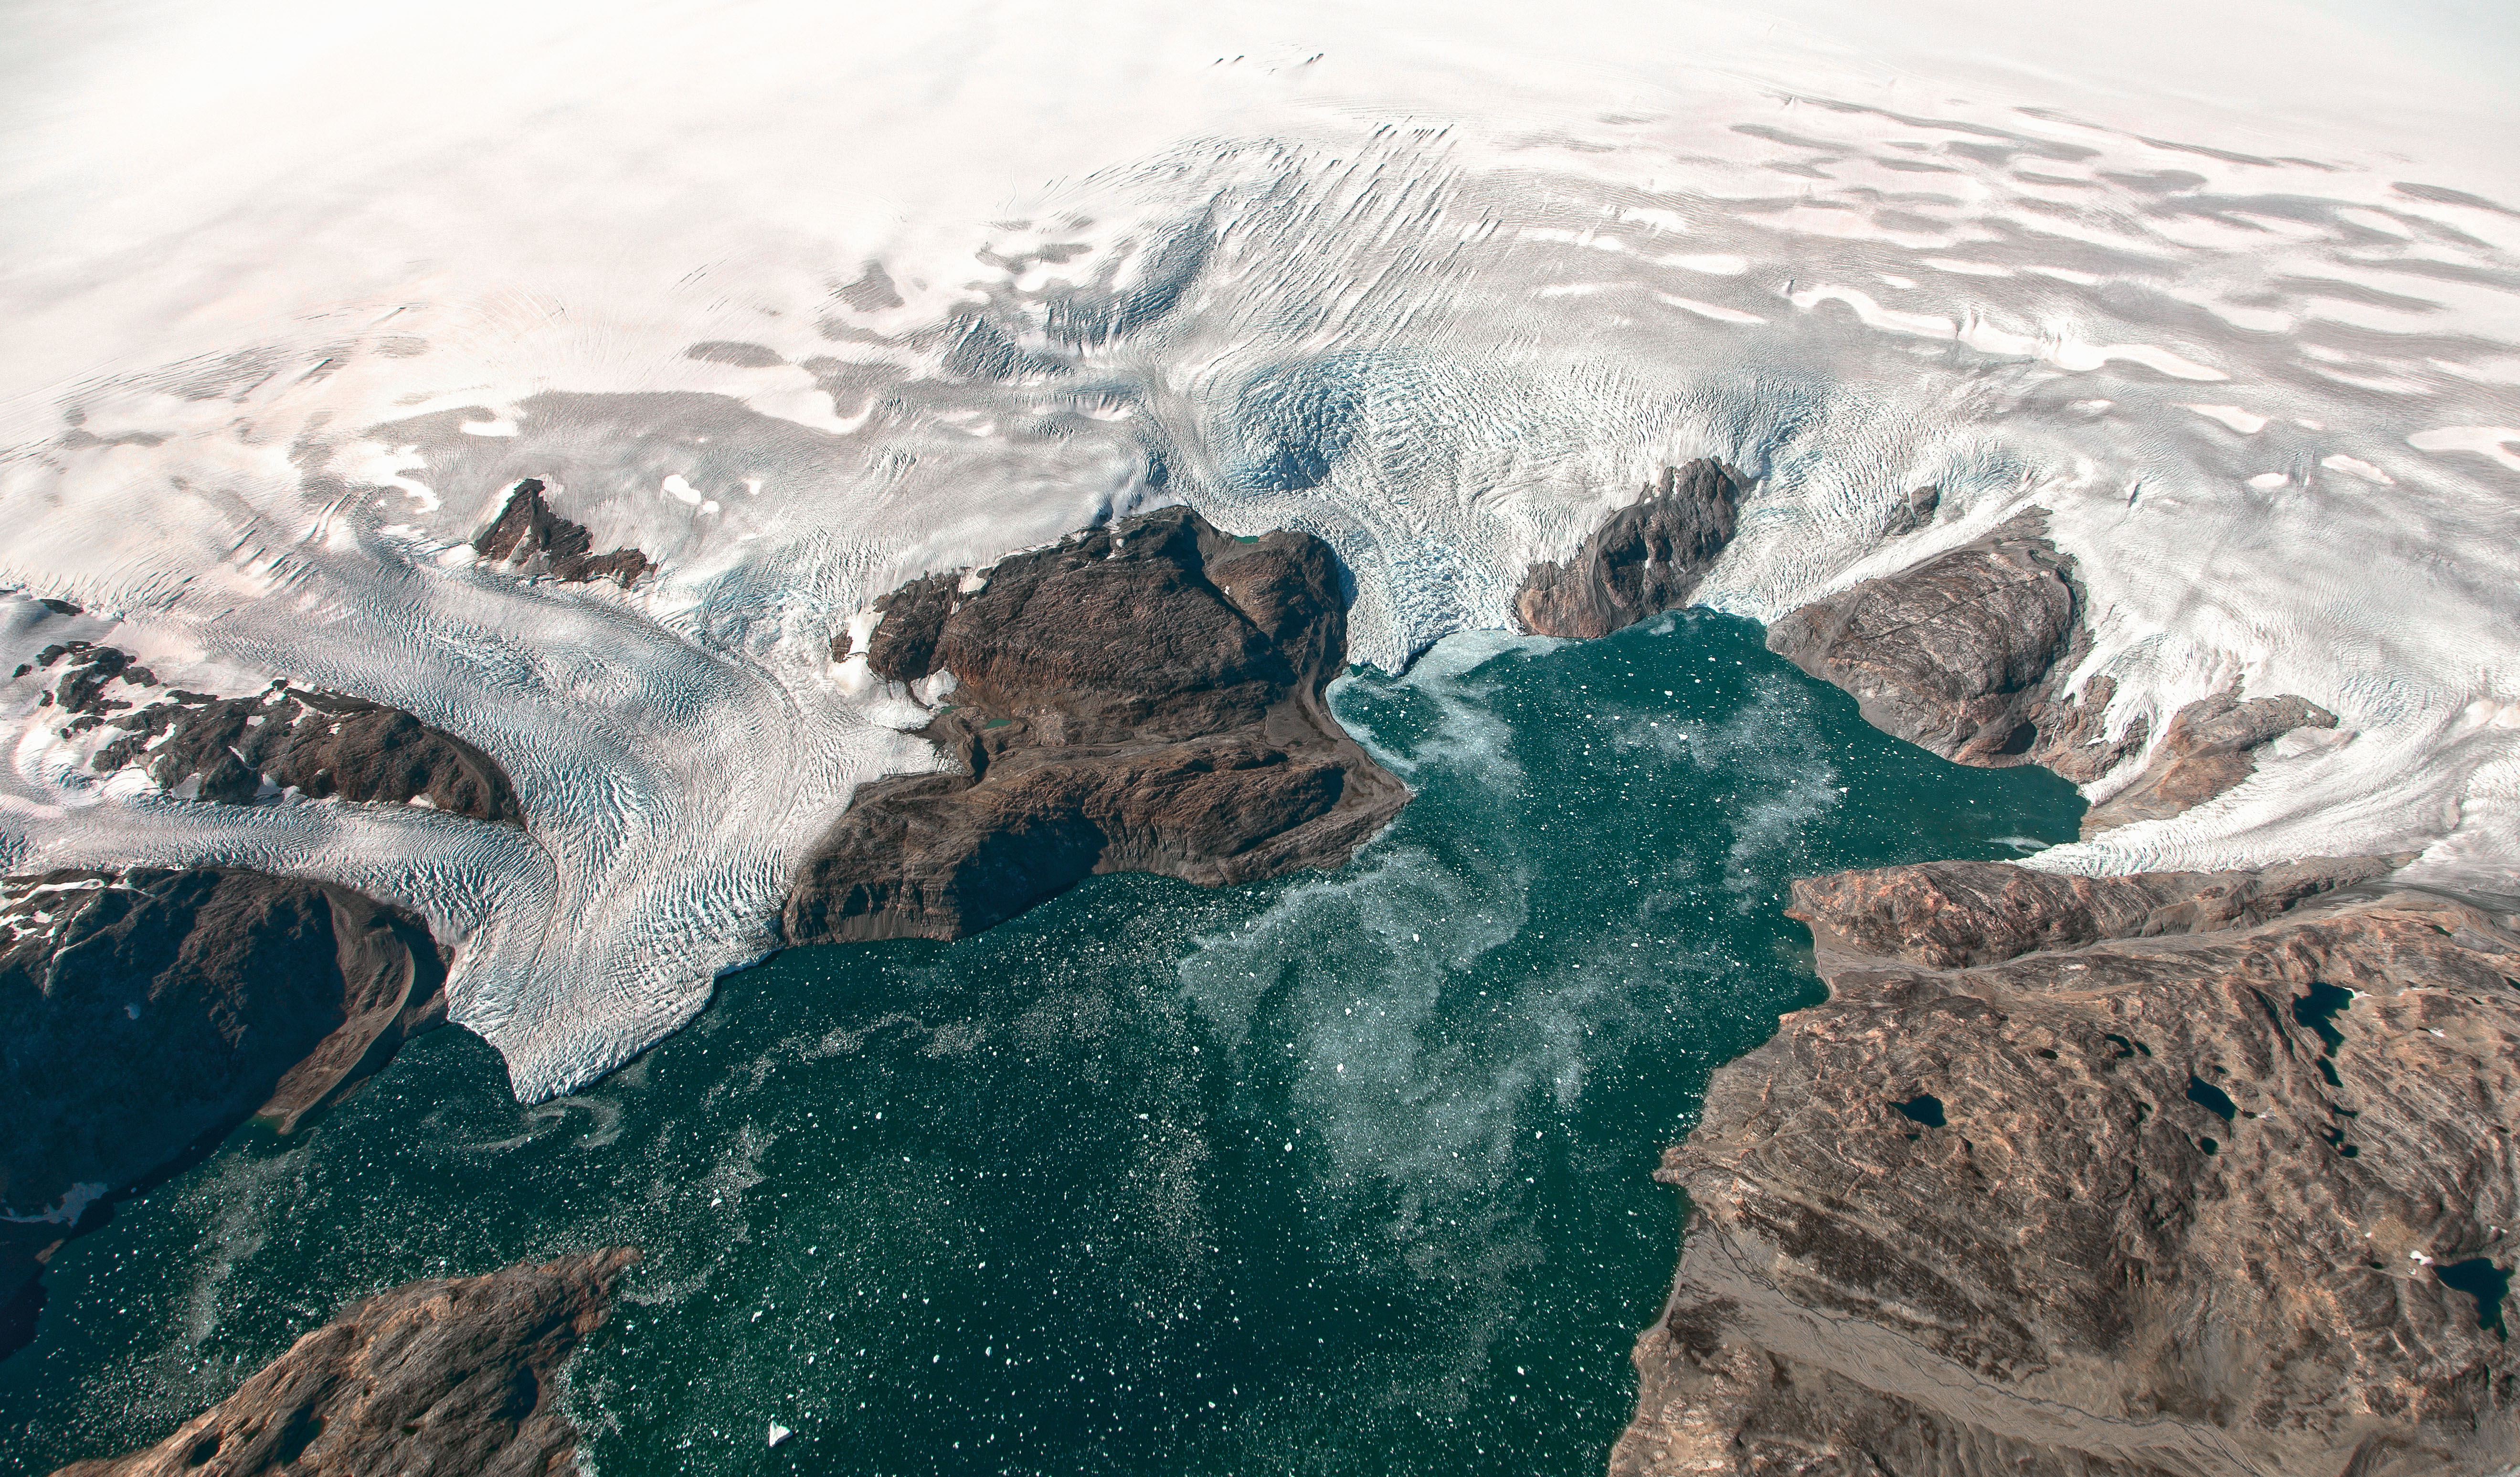 This NASA Earth Observatory image obtained September 22, 2016 show some glaciers observed from the HU-25A Guardian aircraft on September 2, 2016, showing the Brückner and Heim glaciers where they flow into Johan Petersen Fjord in southeastern Greenland.  Greenland's highly unstable ice sheet is melting more than seven percent faster than previously thought, scientists said this week after discovering a hotspot beneath the Earth's crust that was distorting their calculations. The study in the journal Science Advances raises concern about the increasing impact of melting ice on sea level rise, since Greenland is the second largest ice sheet in the world after the one in Antarctica.  / AFP PHOTO / NASA Goddard / Jeremy HARBECK / RESTRICTED TO EDITORIAL USE - MANDATORY CREDIT "AFP PHOTO / JEREMY HARBECK/NASA GODDARD" - NO MARKETING NO ADVERTISING CAMPAIGNS - DISTRIBUTED AS A SERVICE TO CLIENTS  ==TO GO WITH AFP STORY-"Greenland ice melting faster than thought"==